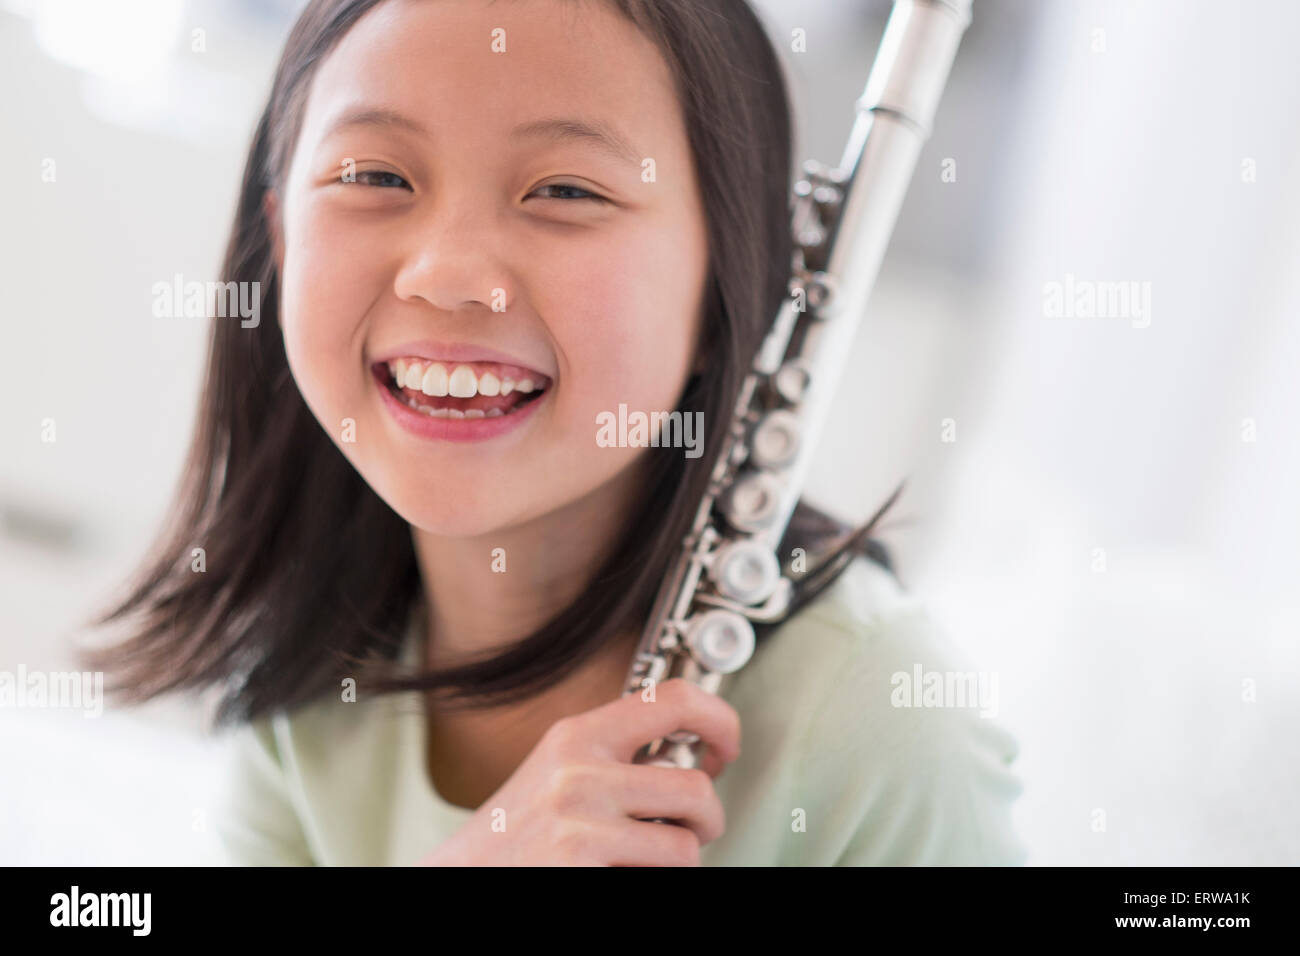 Chinese girl holding flute Banque D'Images